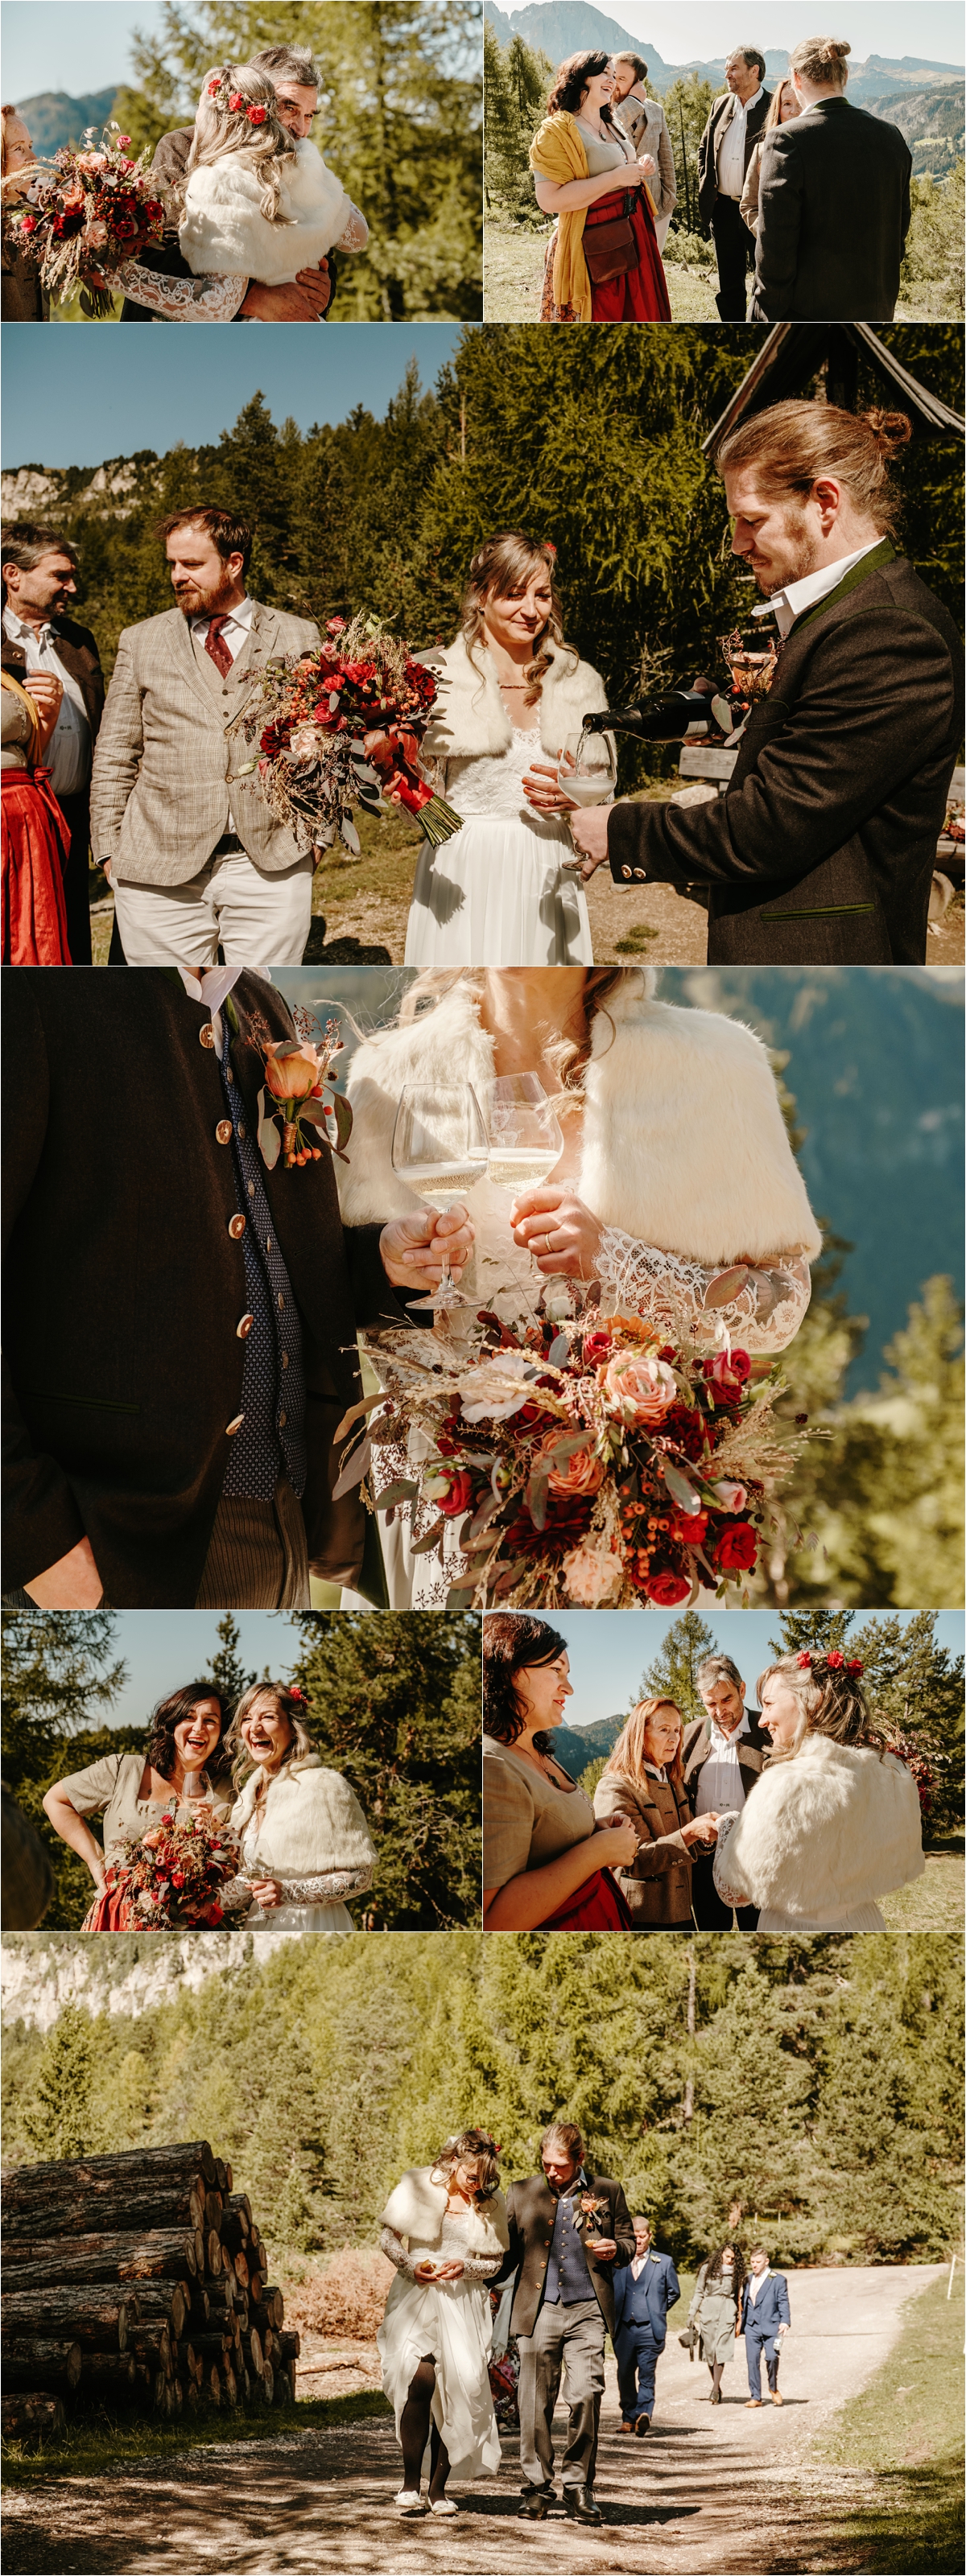 The bride and groom celebrate with their family after their elopement in the Dolomites. Photos by Wild Connections Photography